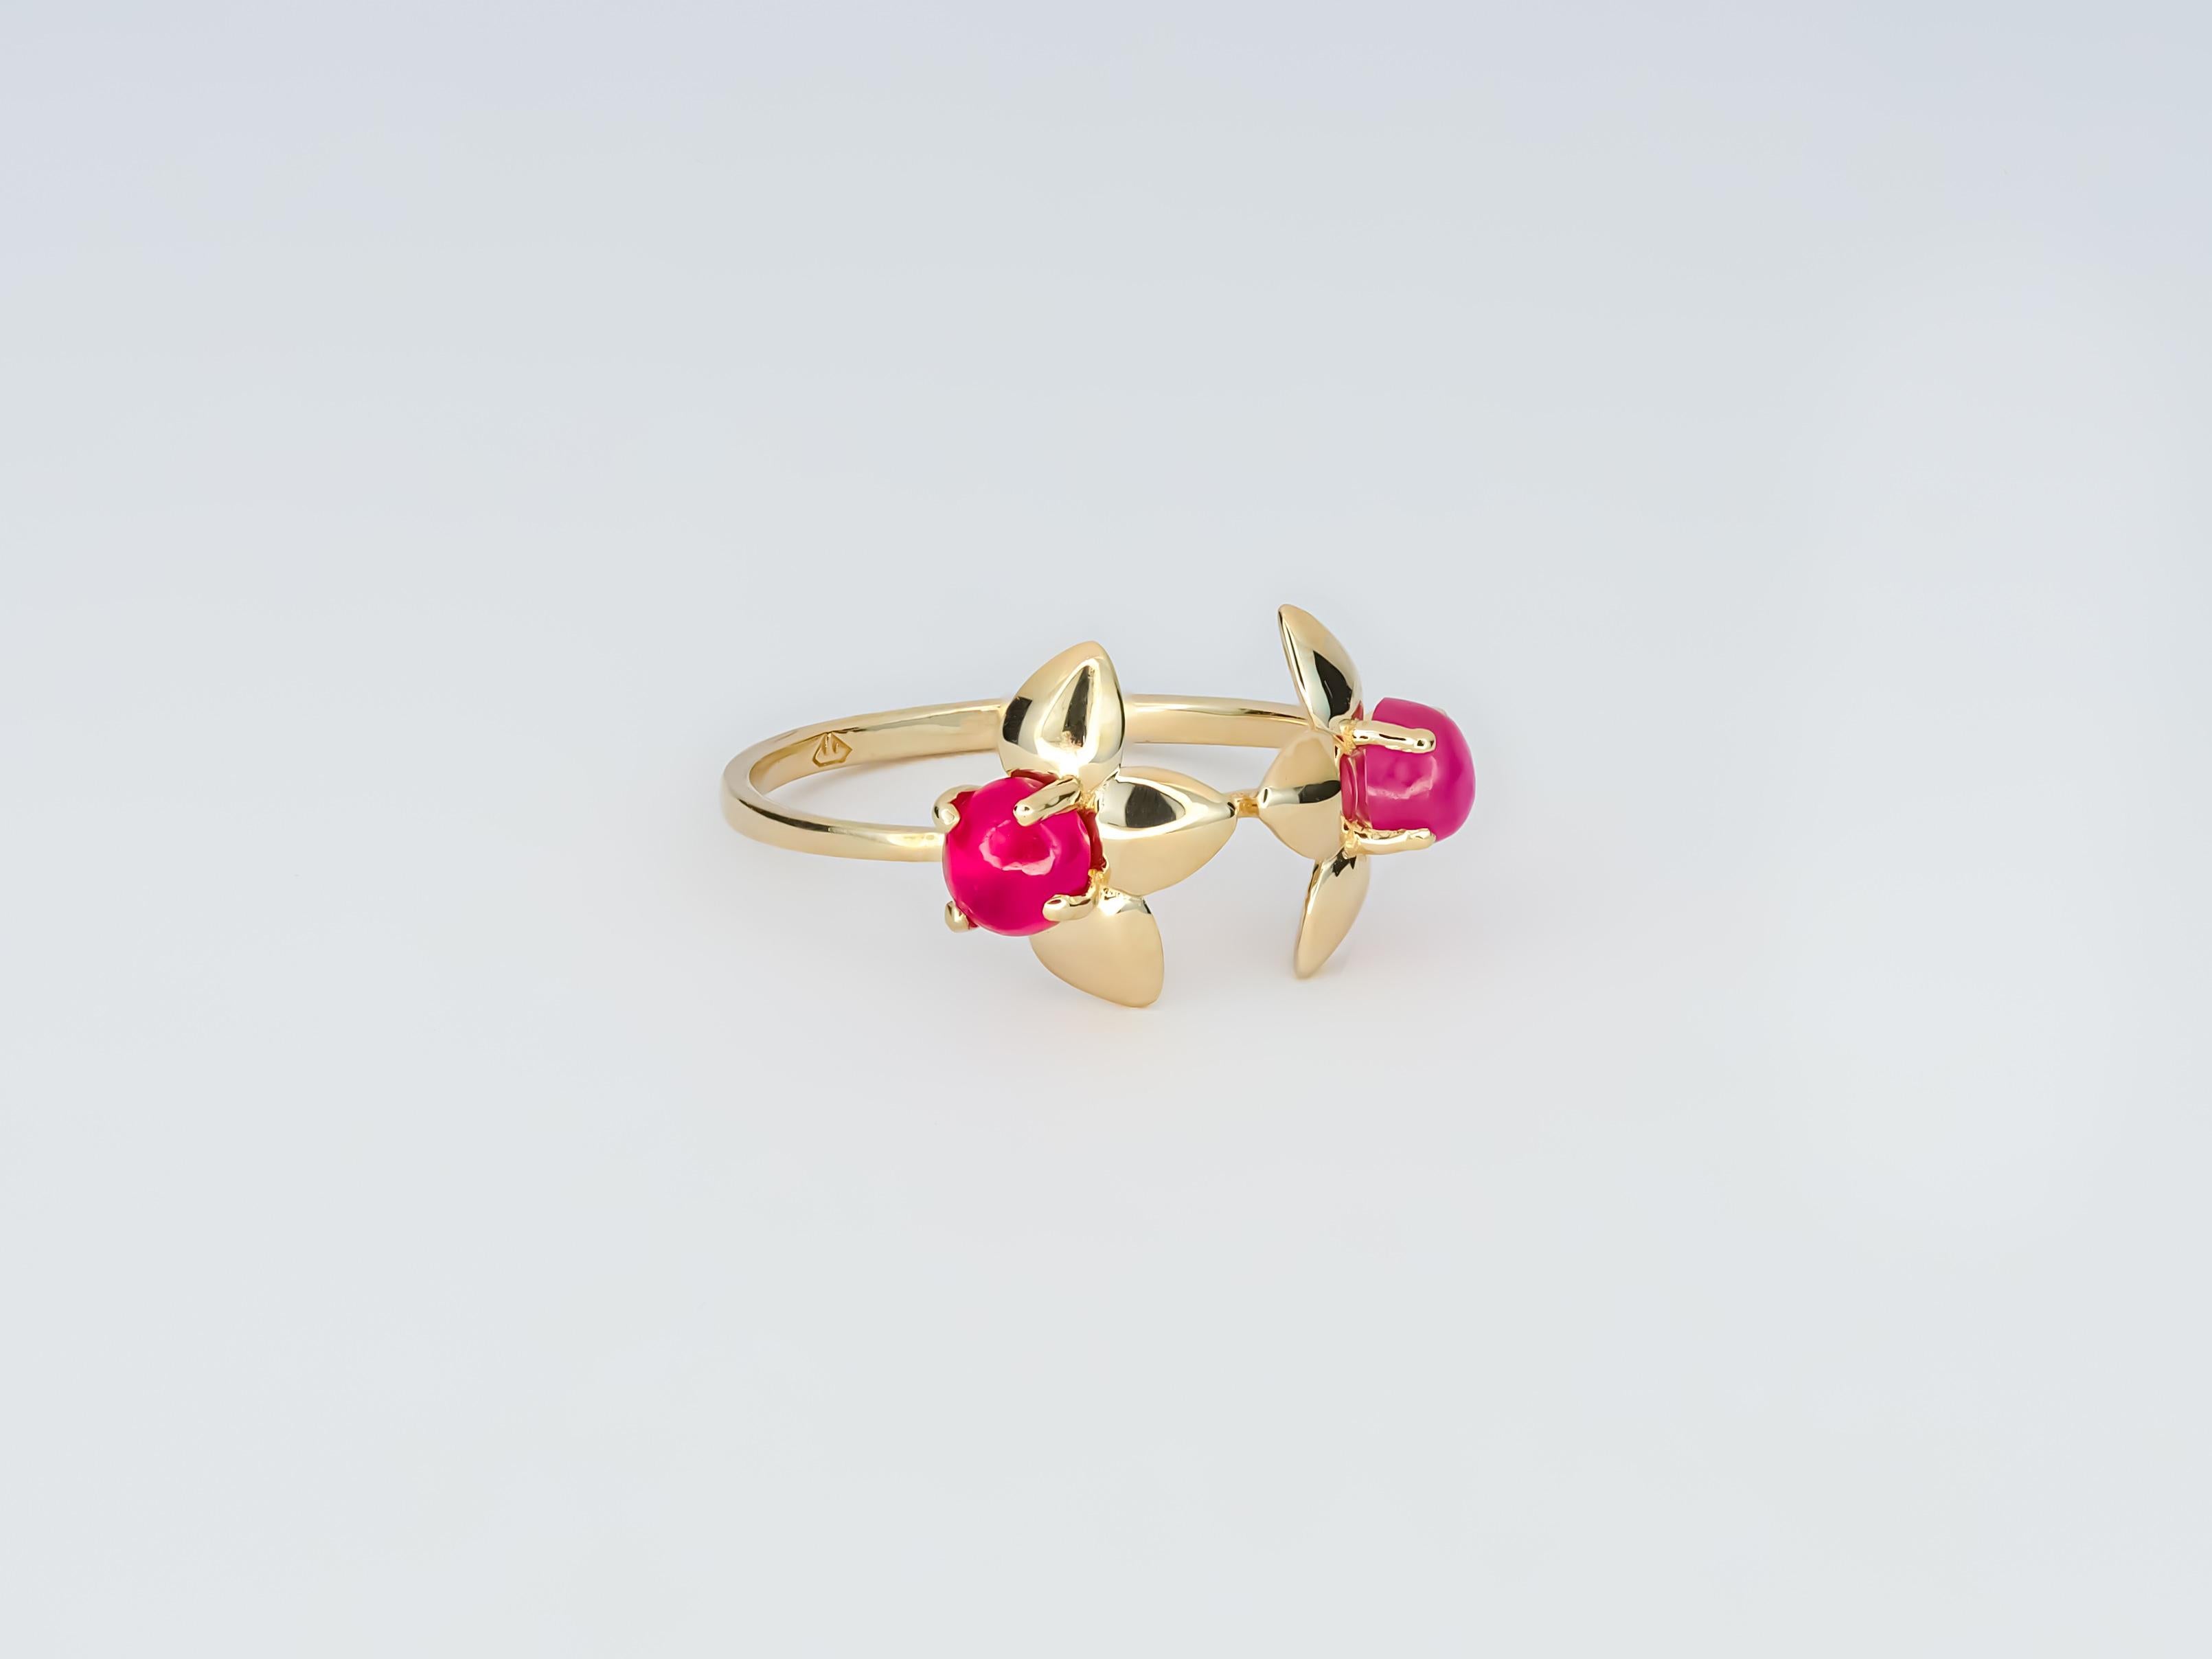 14 karat gold ring with 2 genuine rubies. Flower gold ring. July birthstone.
Weight: 1.50 g.
Size: from 3 US to 10 US
Gemstones: 2 genuine rubies
Weight: 0.45 ct x 2 pieces, 0.90 ct total
Cabochon cut, color - red and rose
Clarity: Transparent with